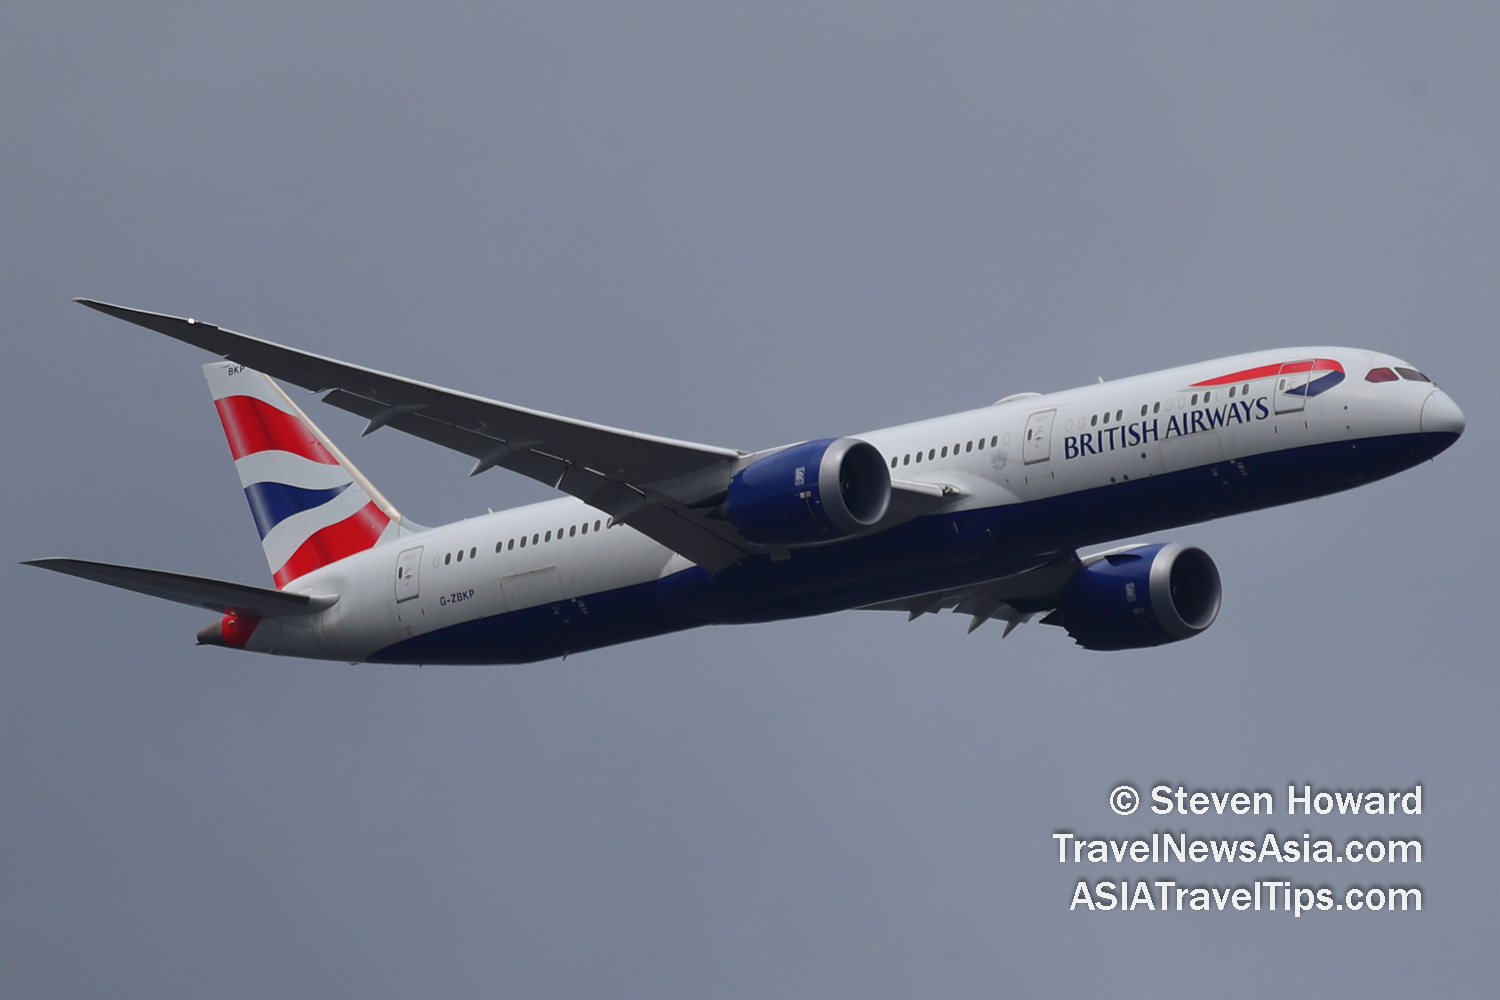 British Airways Boeing 787-9 reg: G-ZBKP. Picture by Steven Howard of TravelNewsAsia.com Click to enlarge.